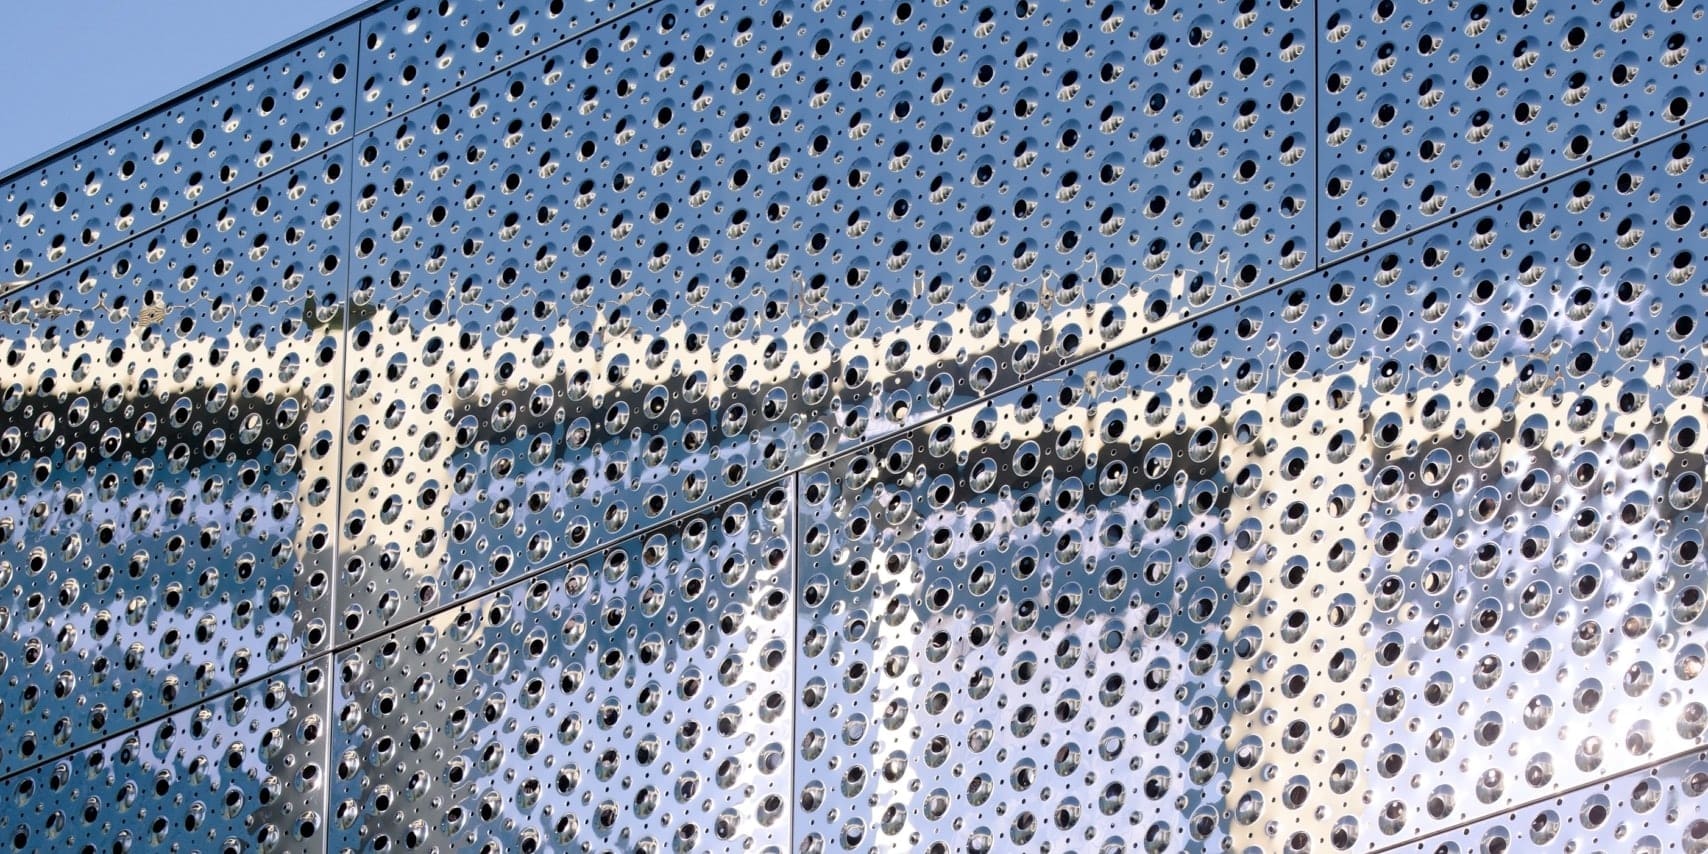 Detail of the custom perforated emboss used to bump and perf the stainless steel facade of Harim Tower.